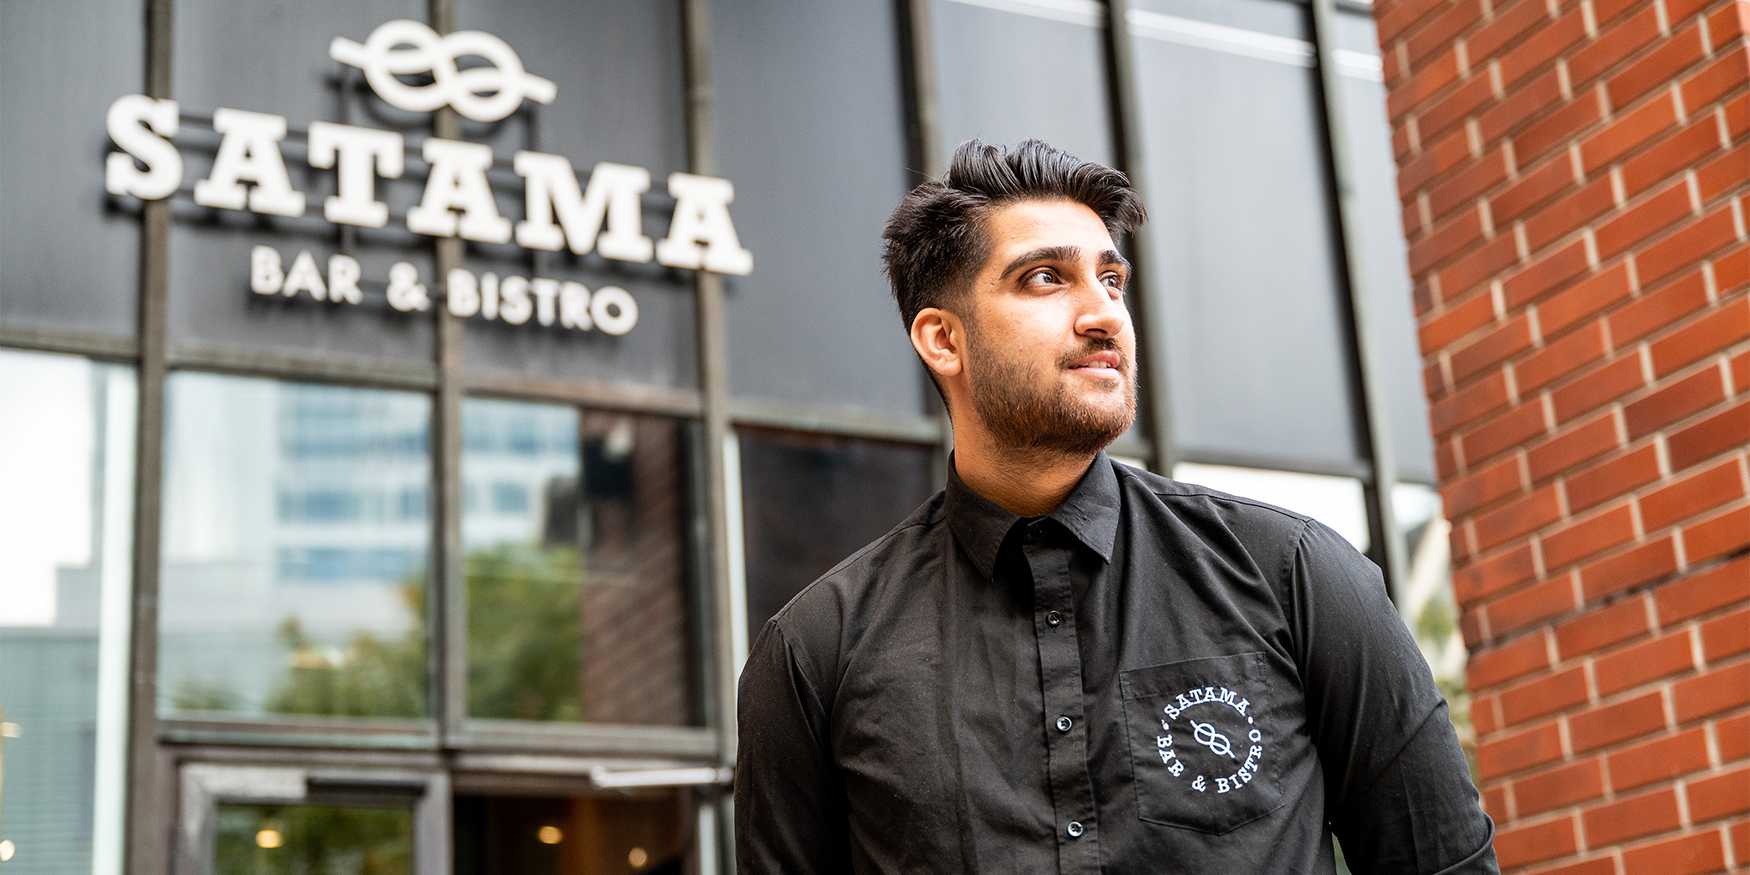 Winning Best Lunch in Finland competition boosts Satama Bar & Bistro's popularity